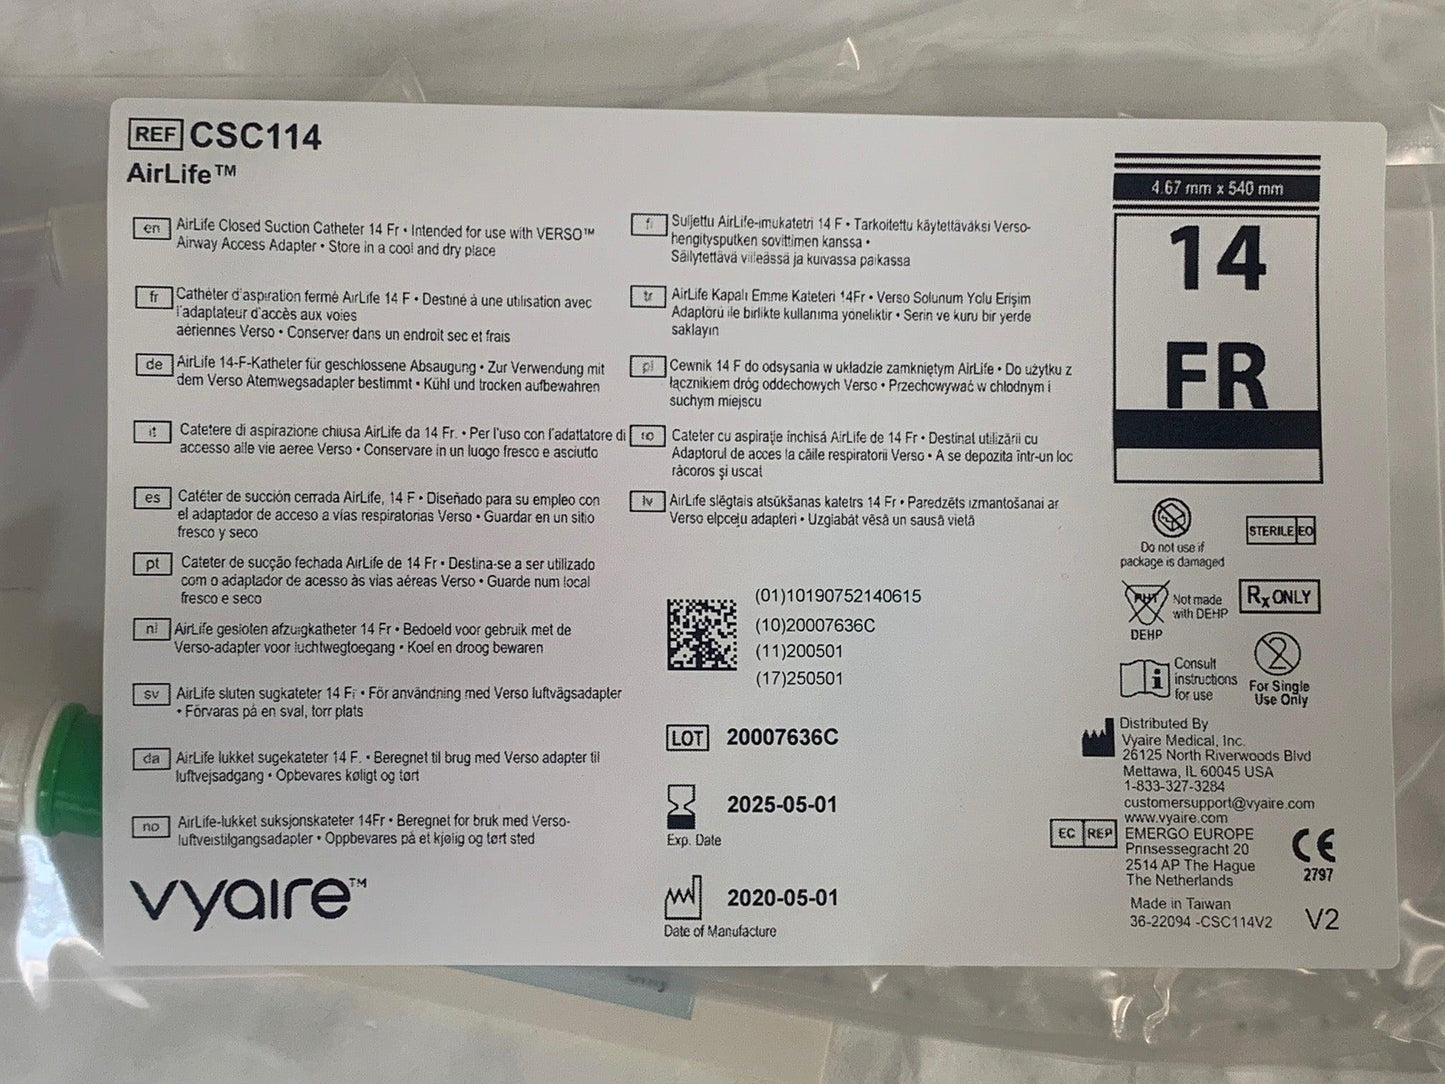 NEW Lot of 10 Vyaire Airlife Verso 14 FR Closed Suction Catheter CSC114